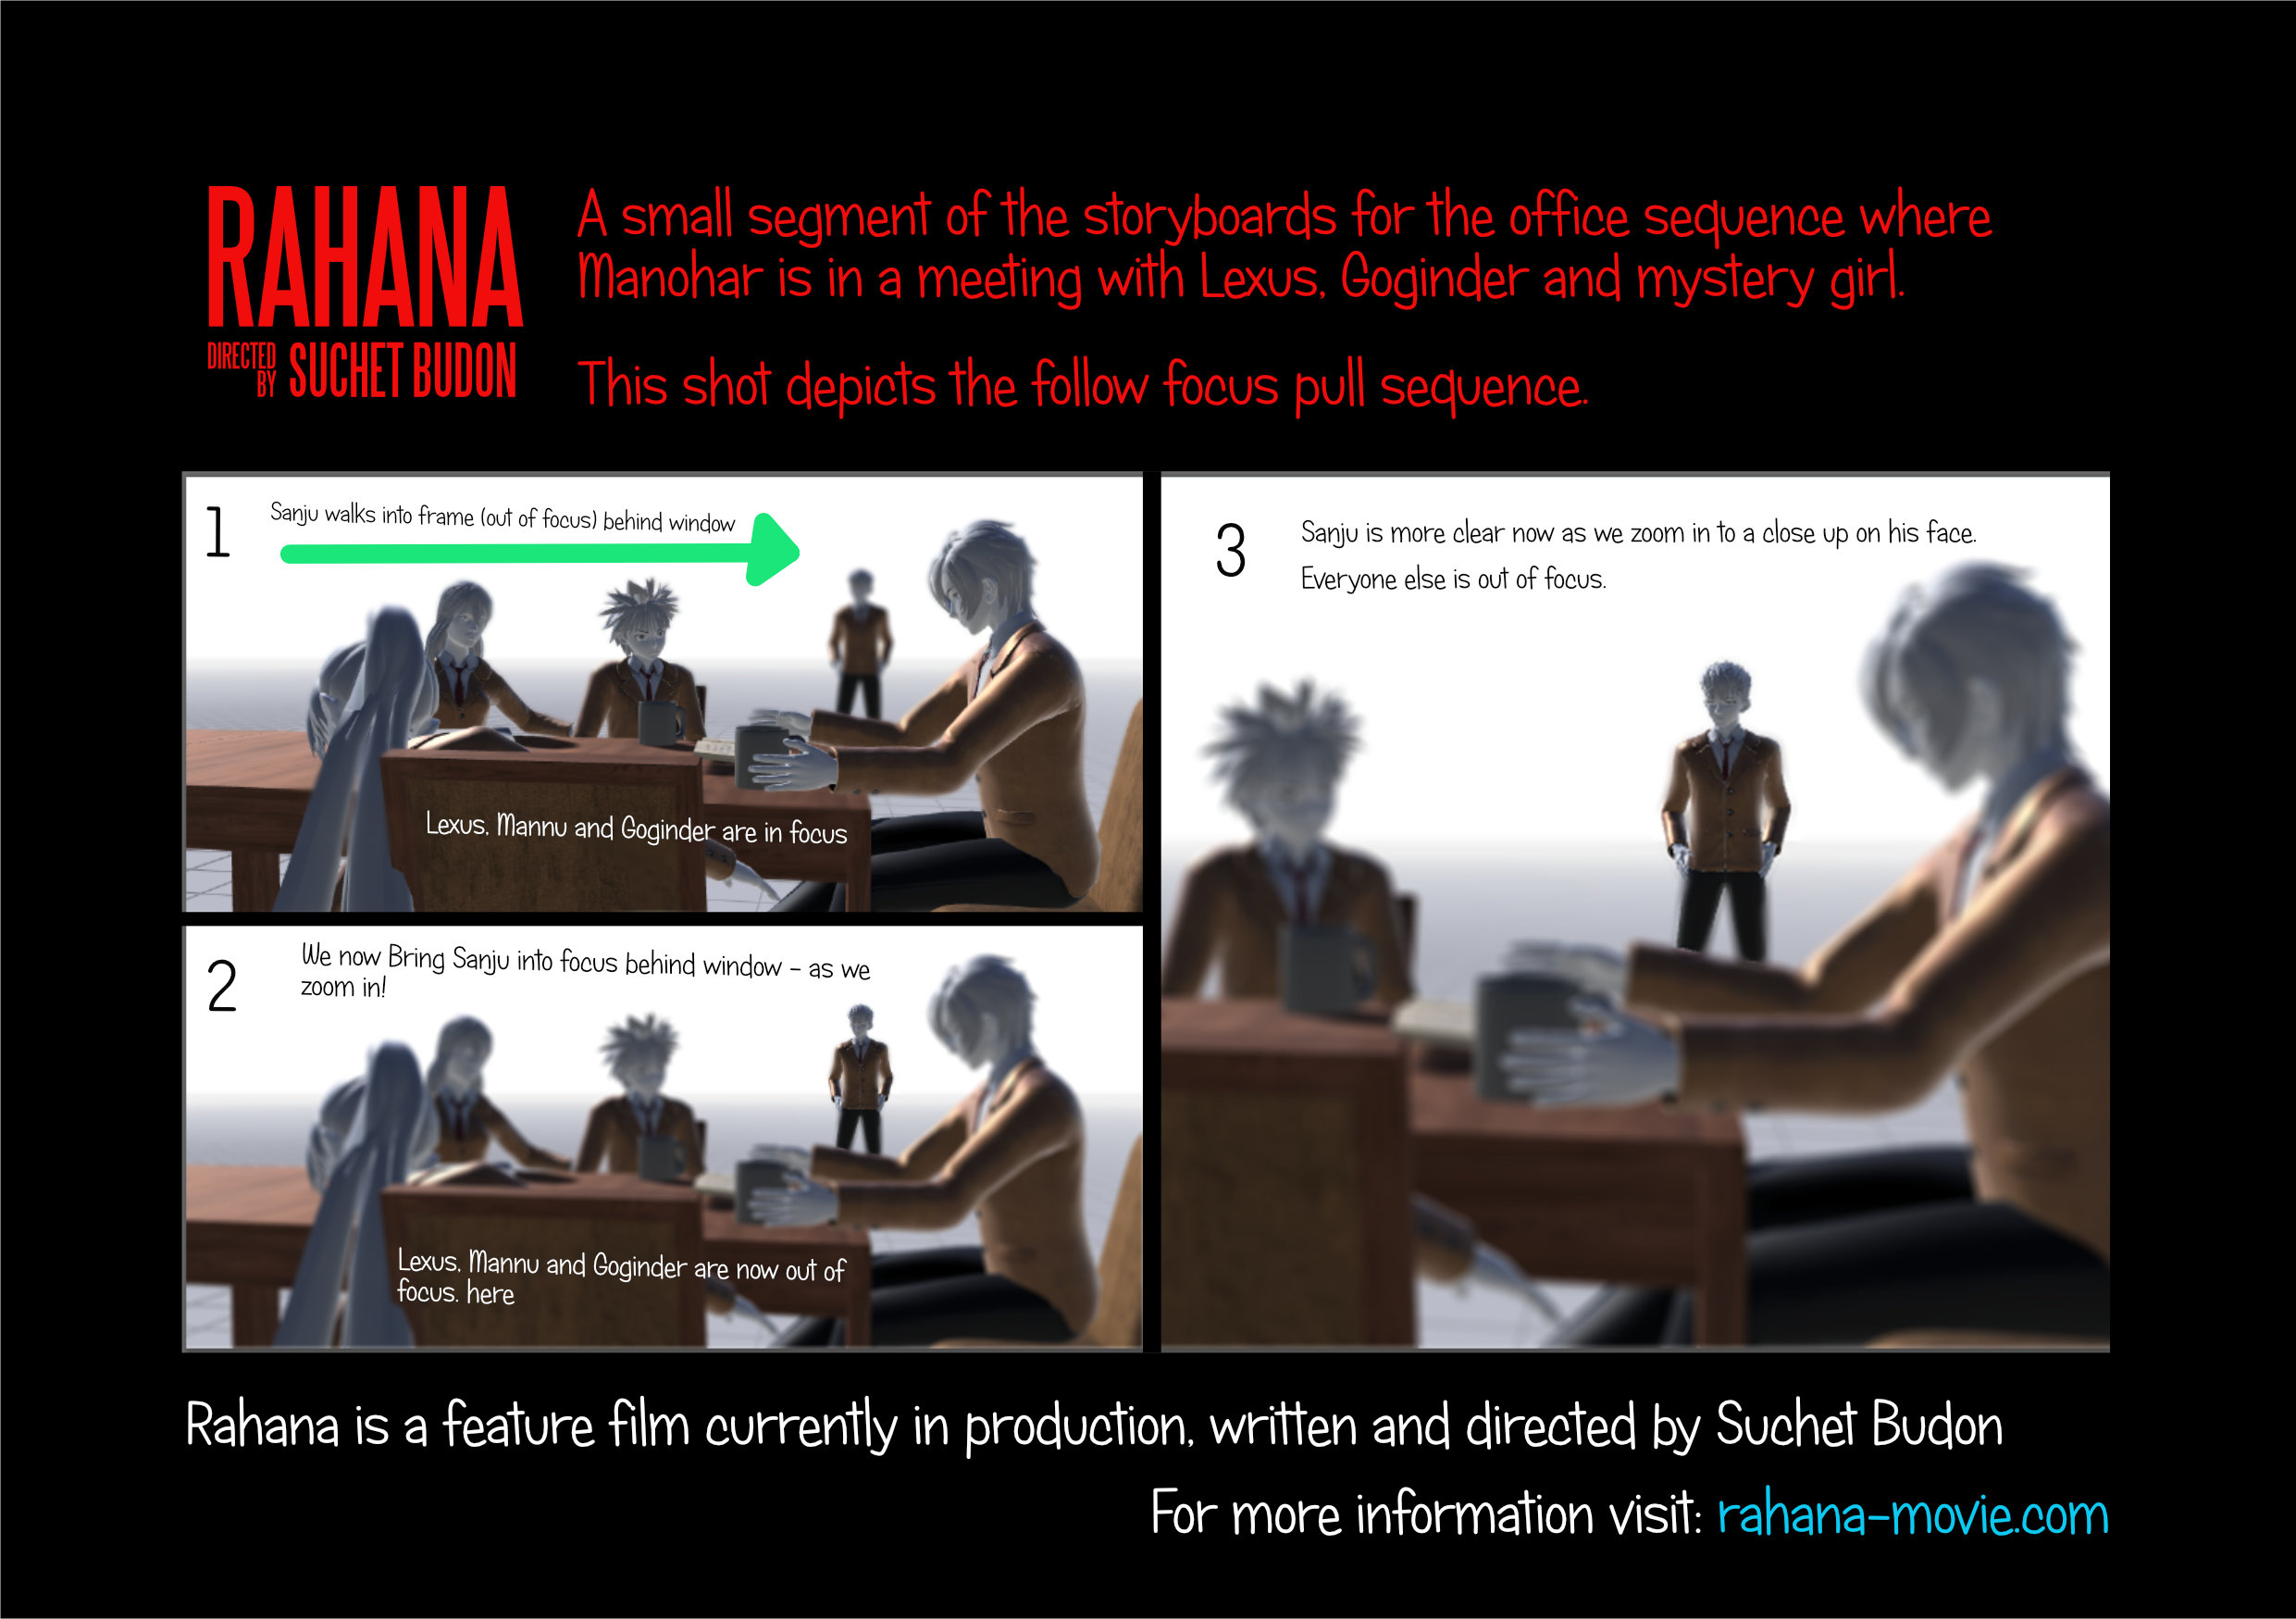 Some 3D storyboard images of people in an office